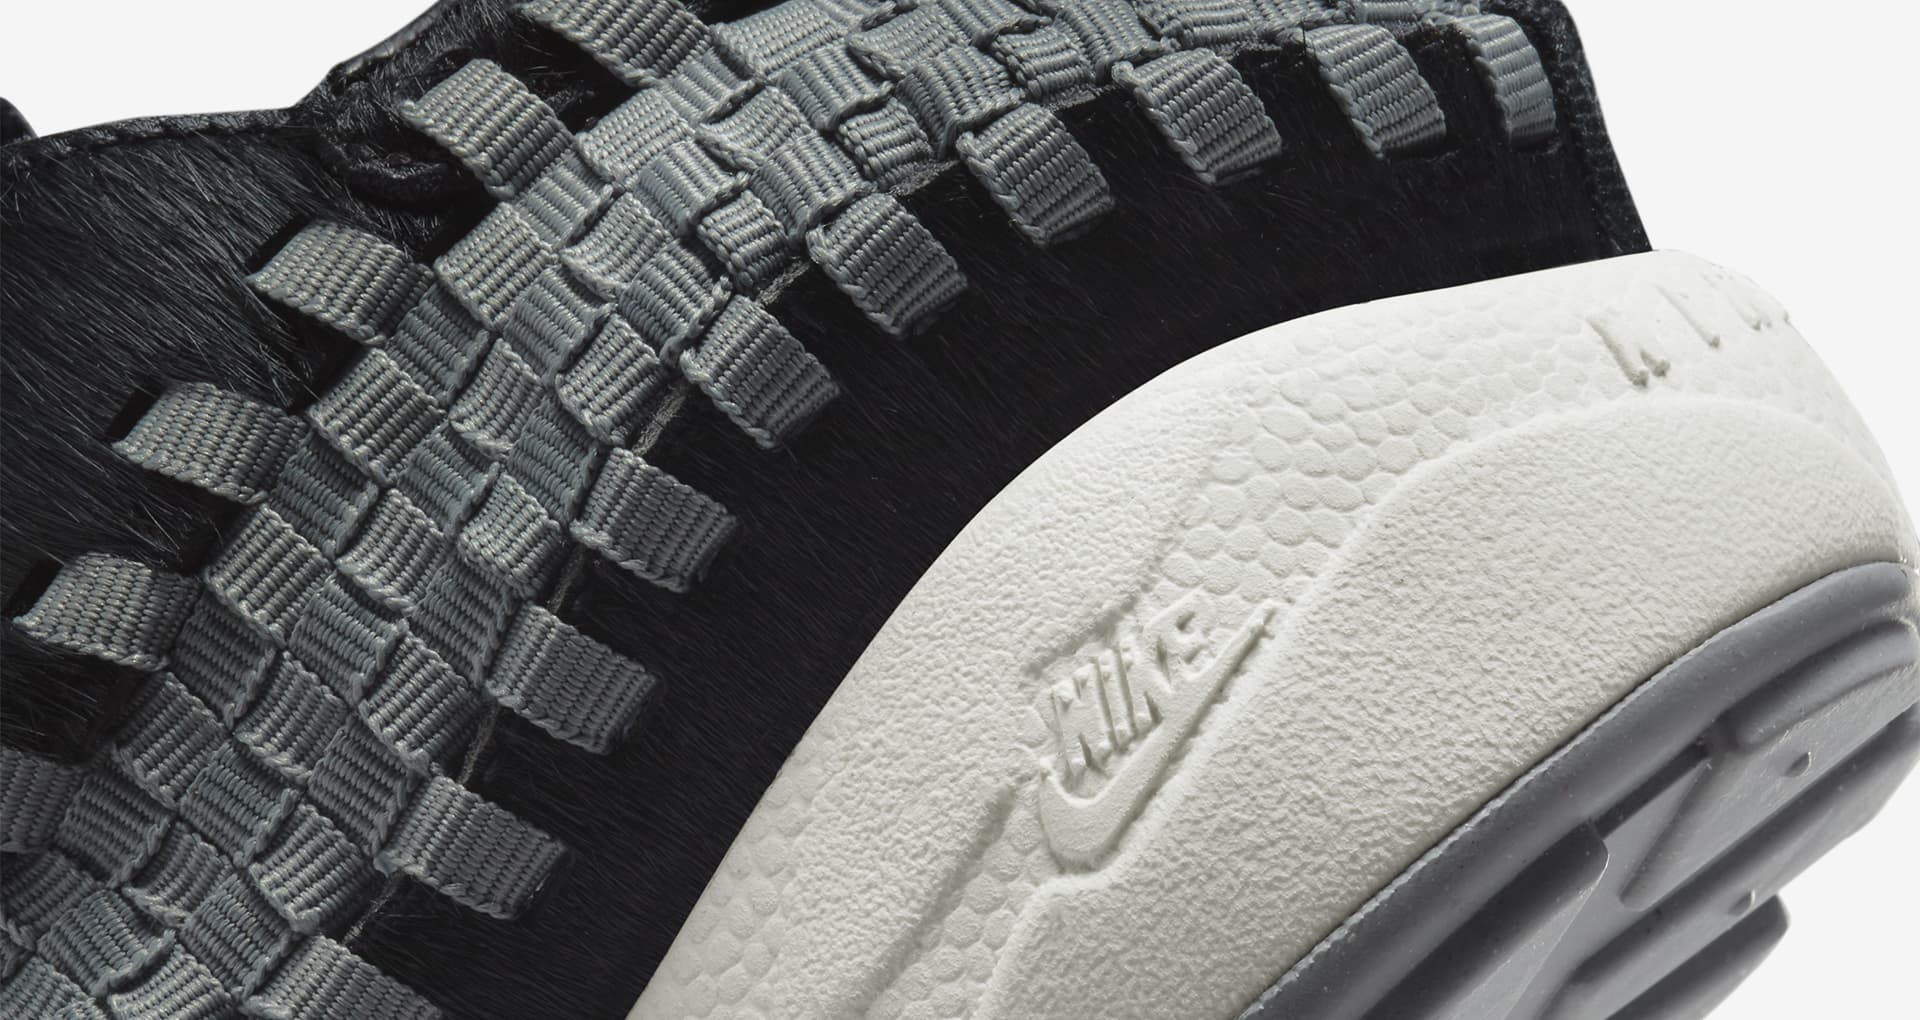 Air Footscape Woven 'Black and Smoke Grey' (FB1959-001) release date ...